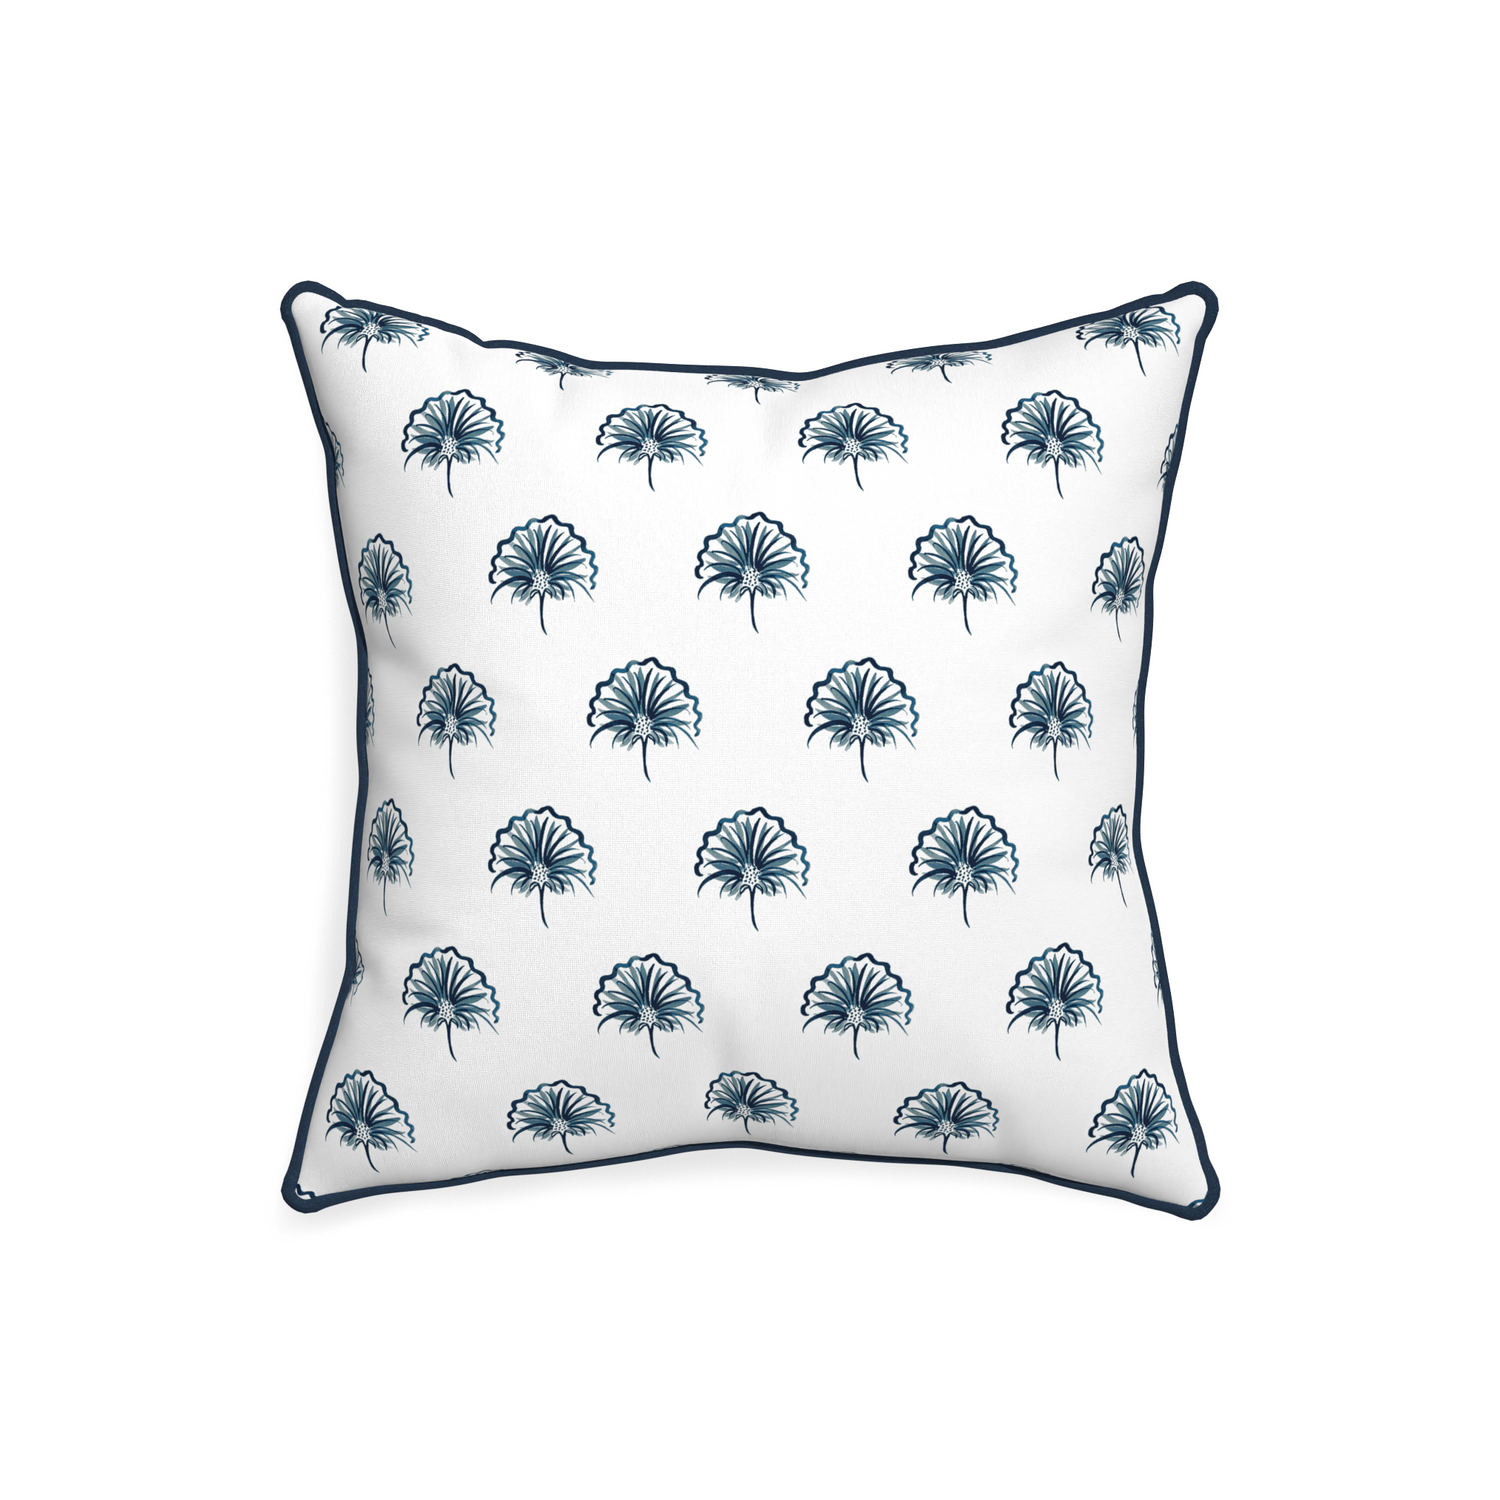 20-square penelope midnight custom floral navypillow with c piping on white background